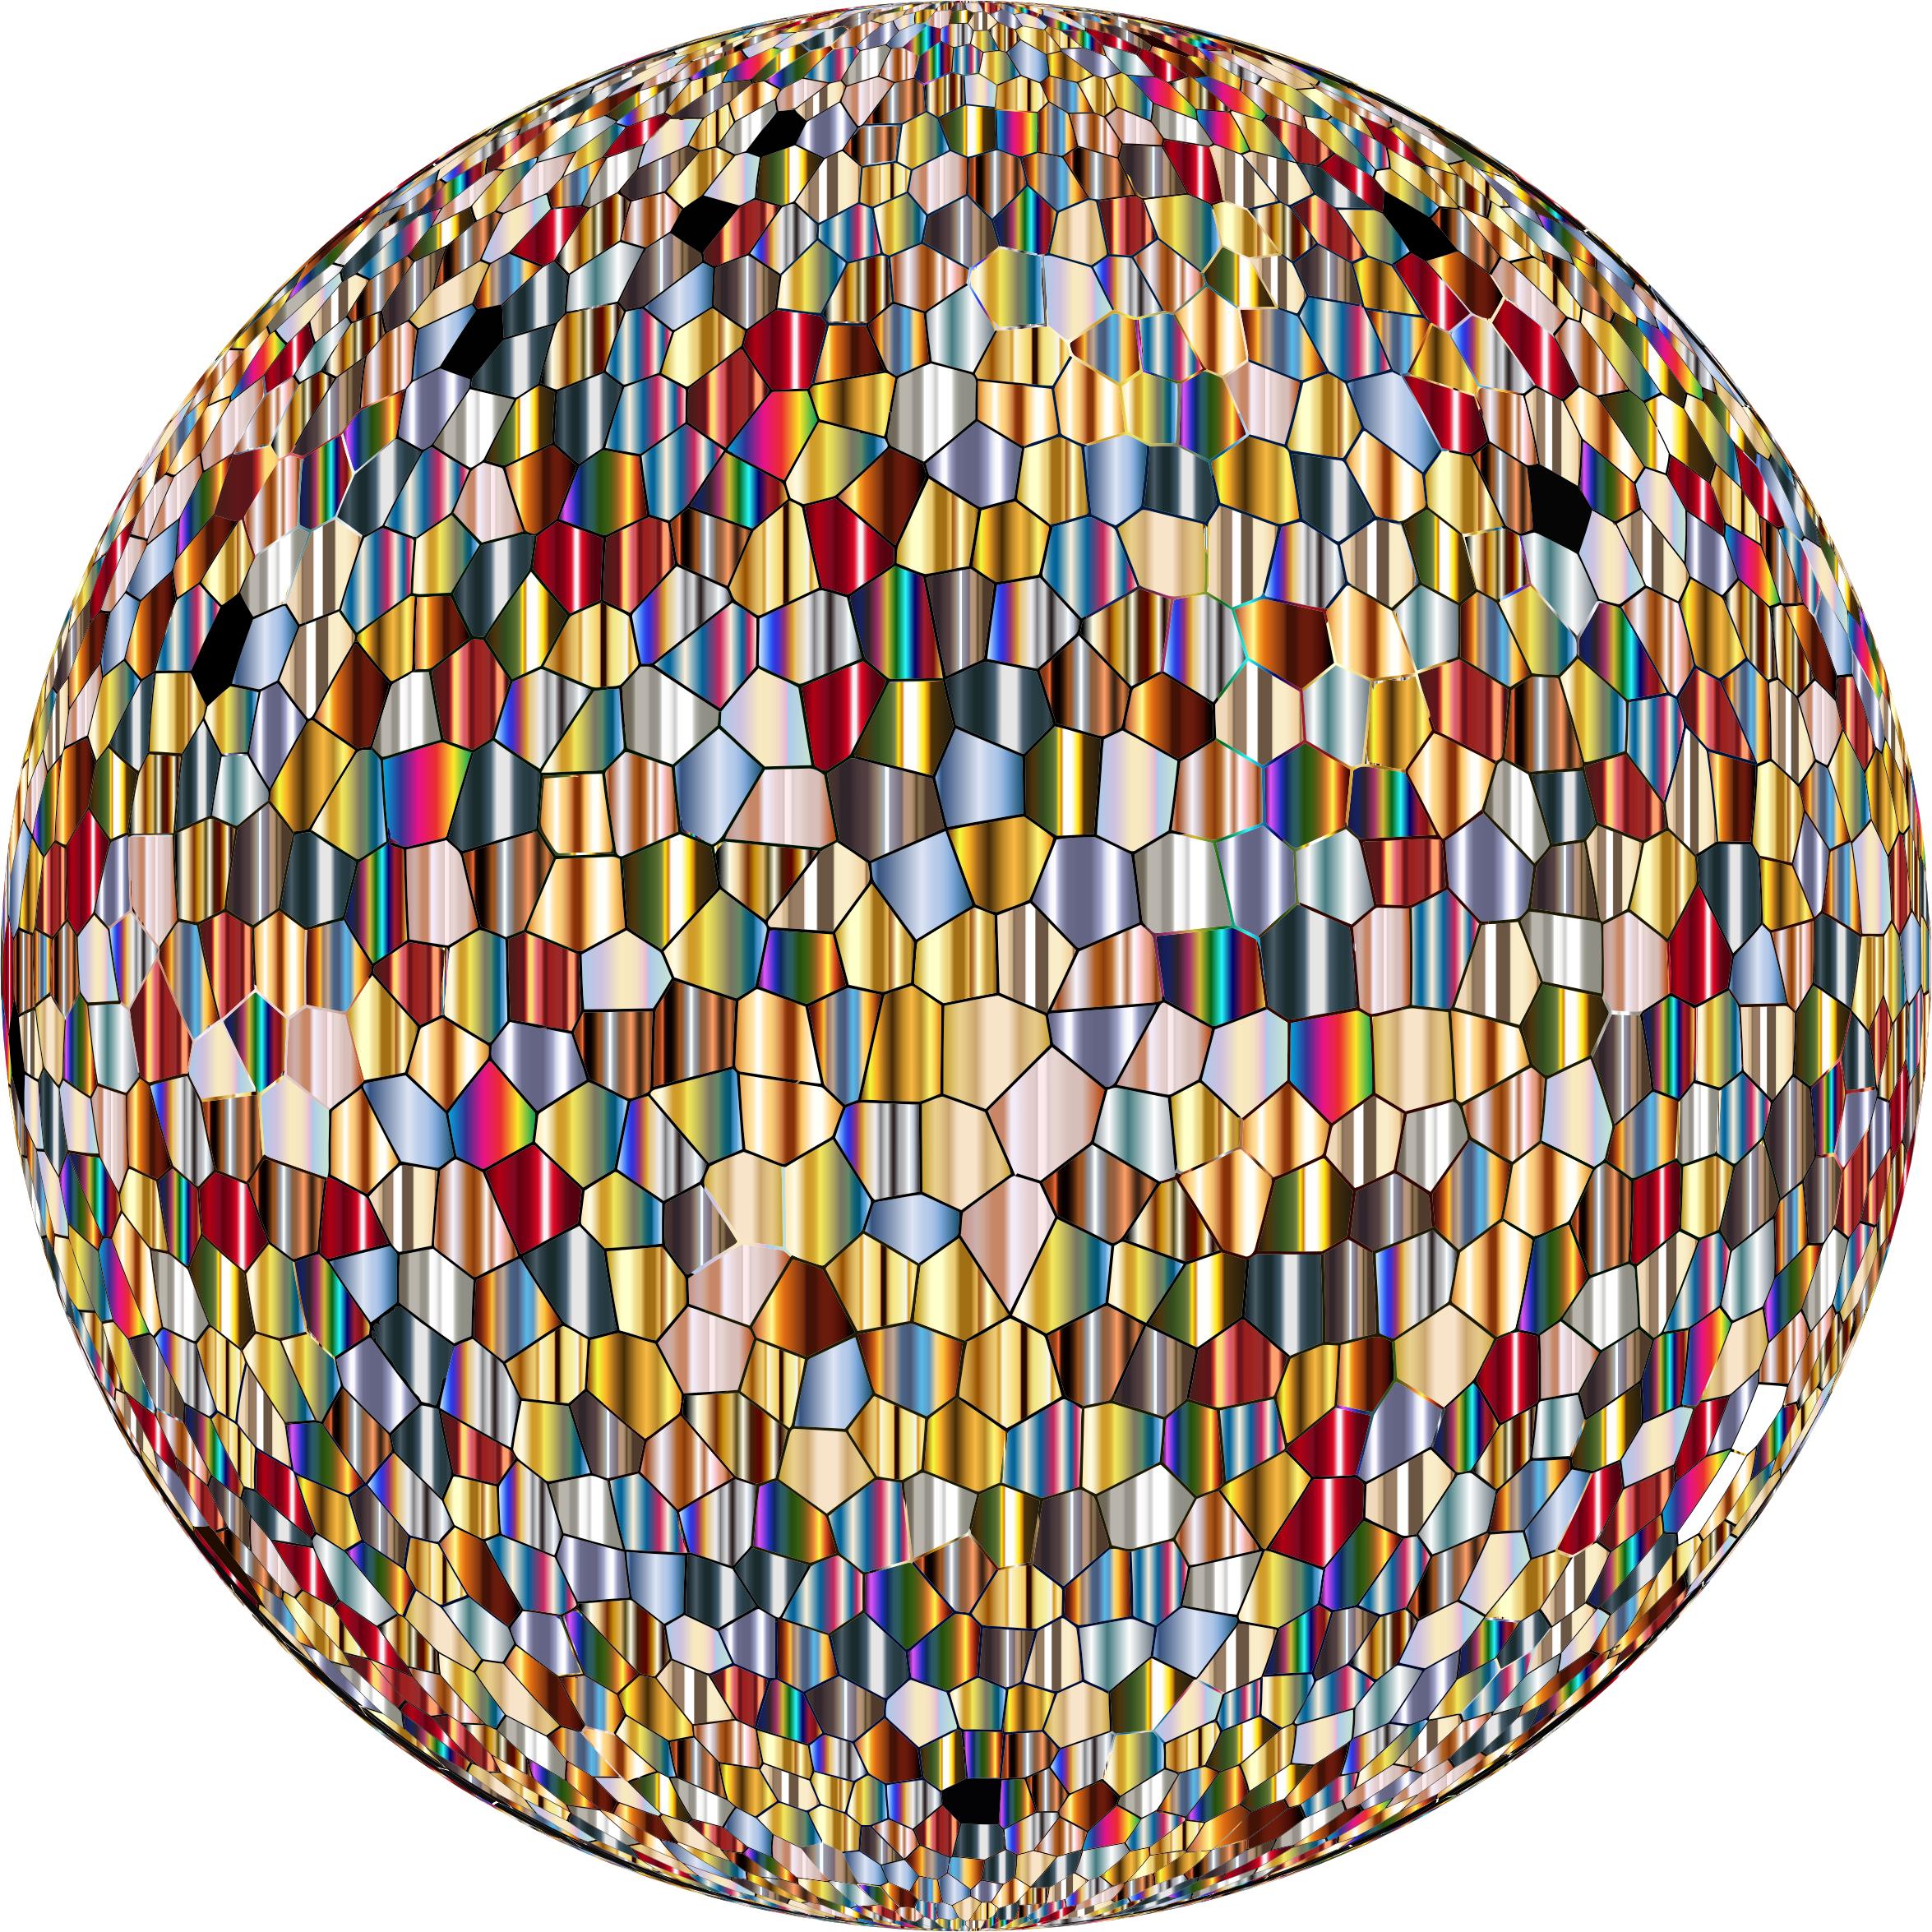 Shimmering Iridescent Mosaic Tiles Sphere png